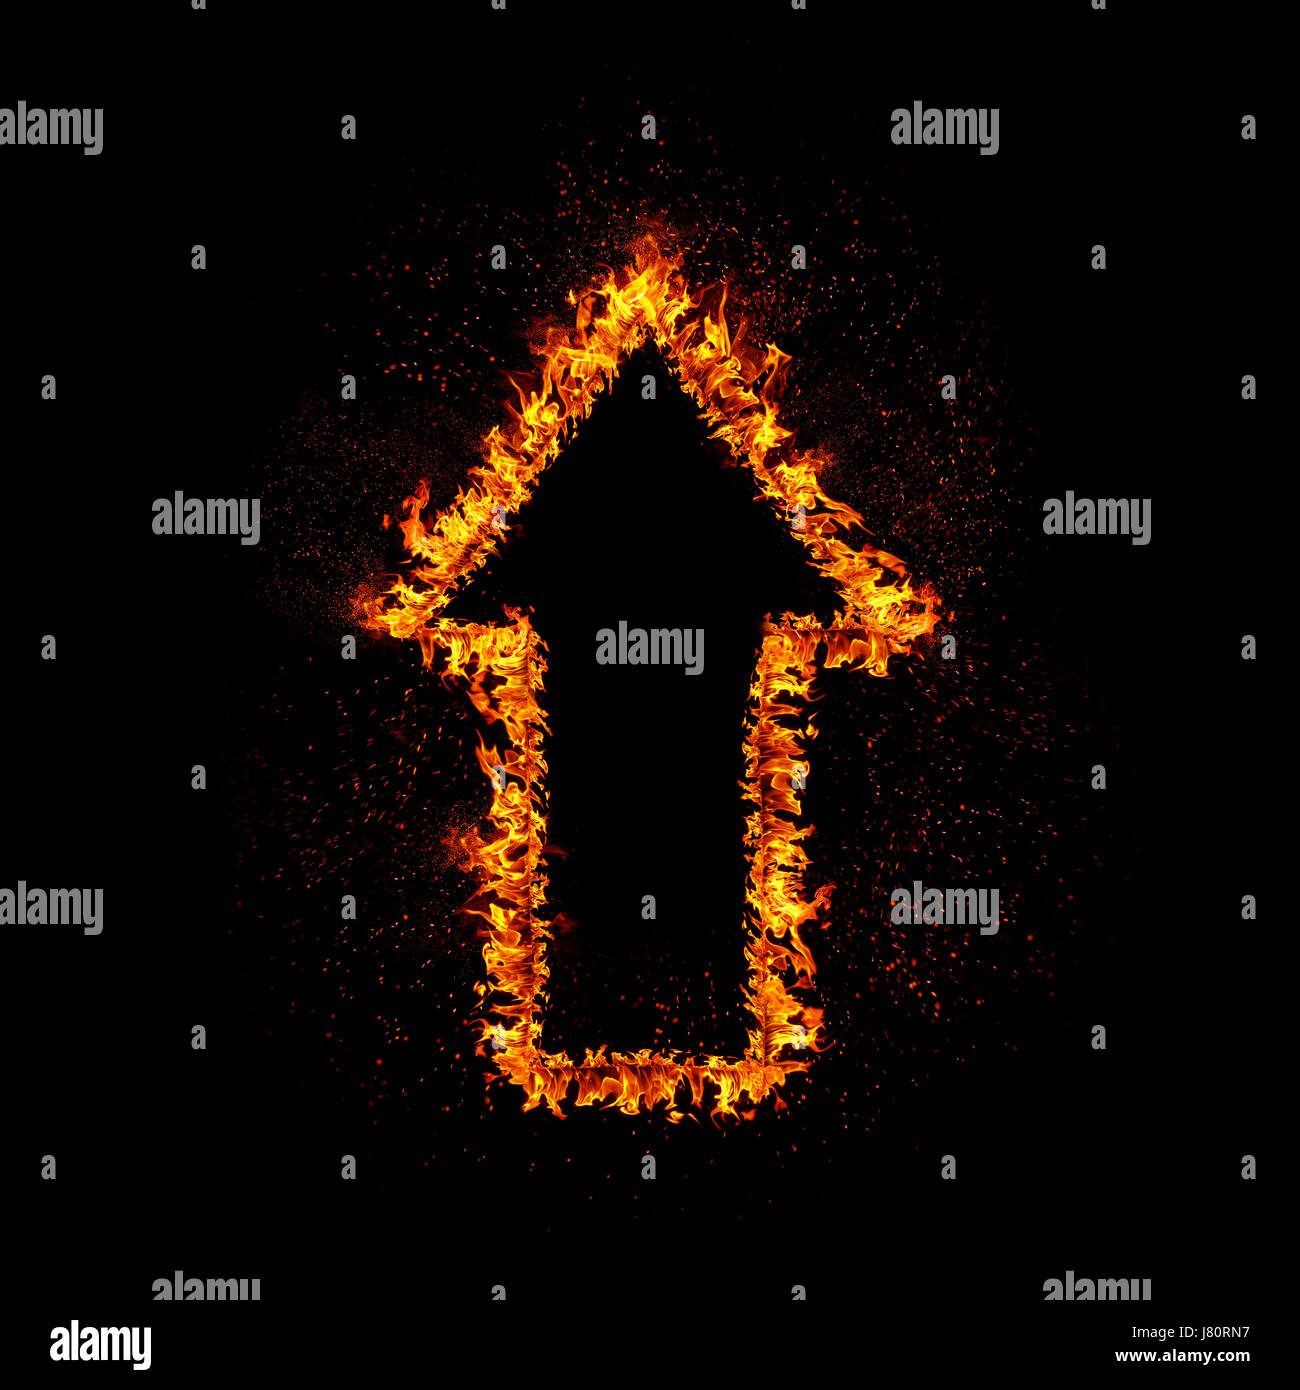 Flaming arrow grow up isolated on black background. Stock Photo